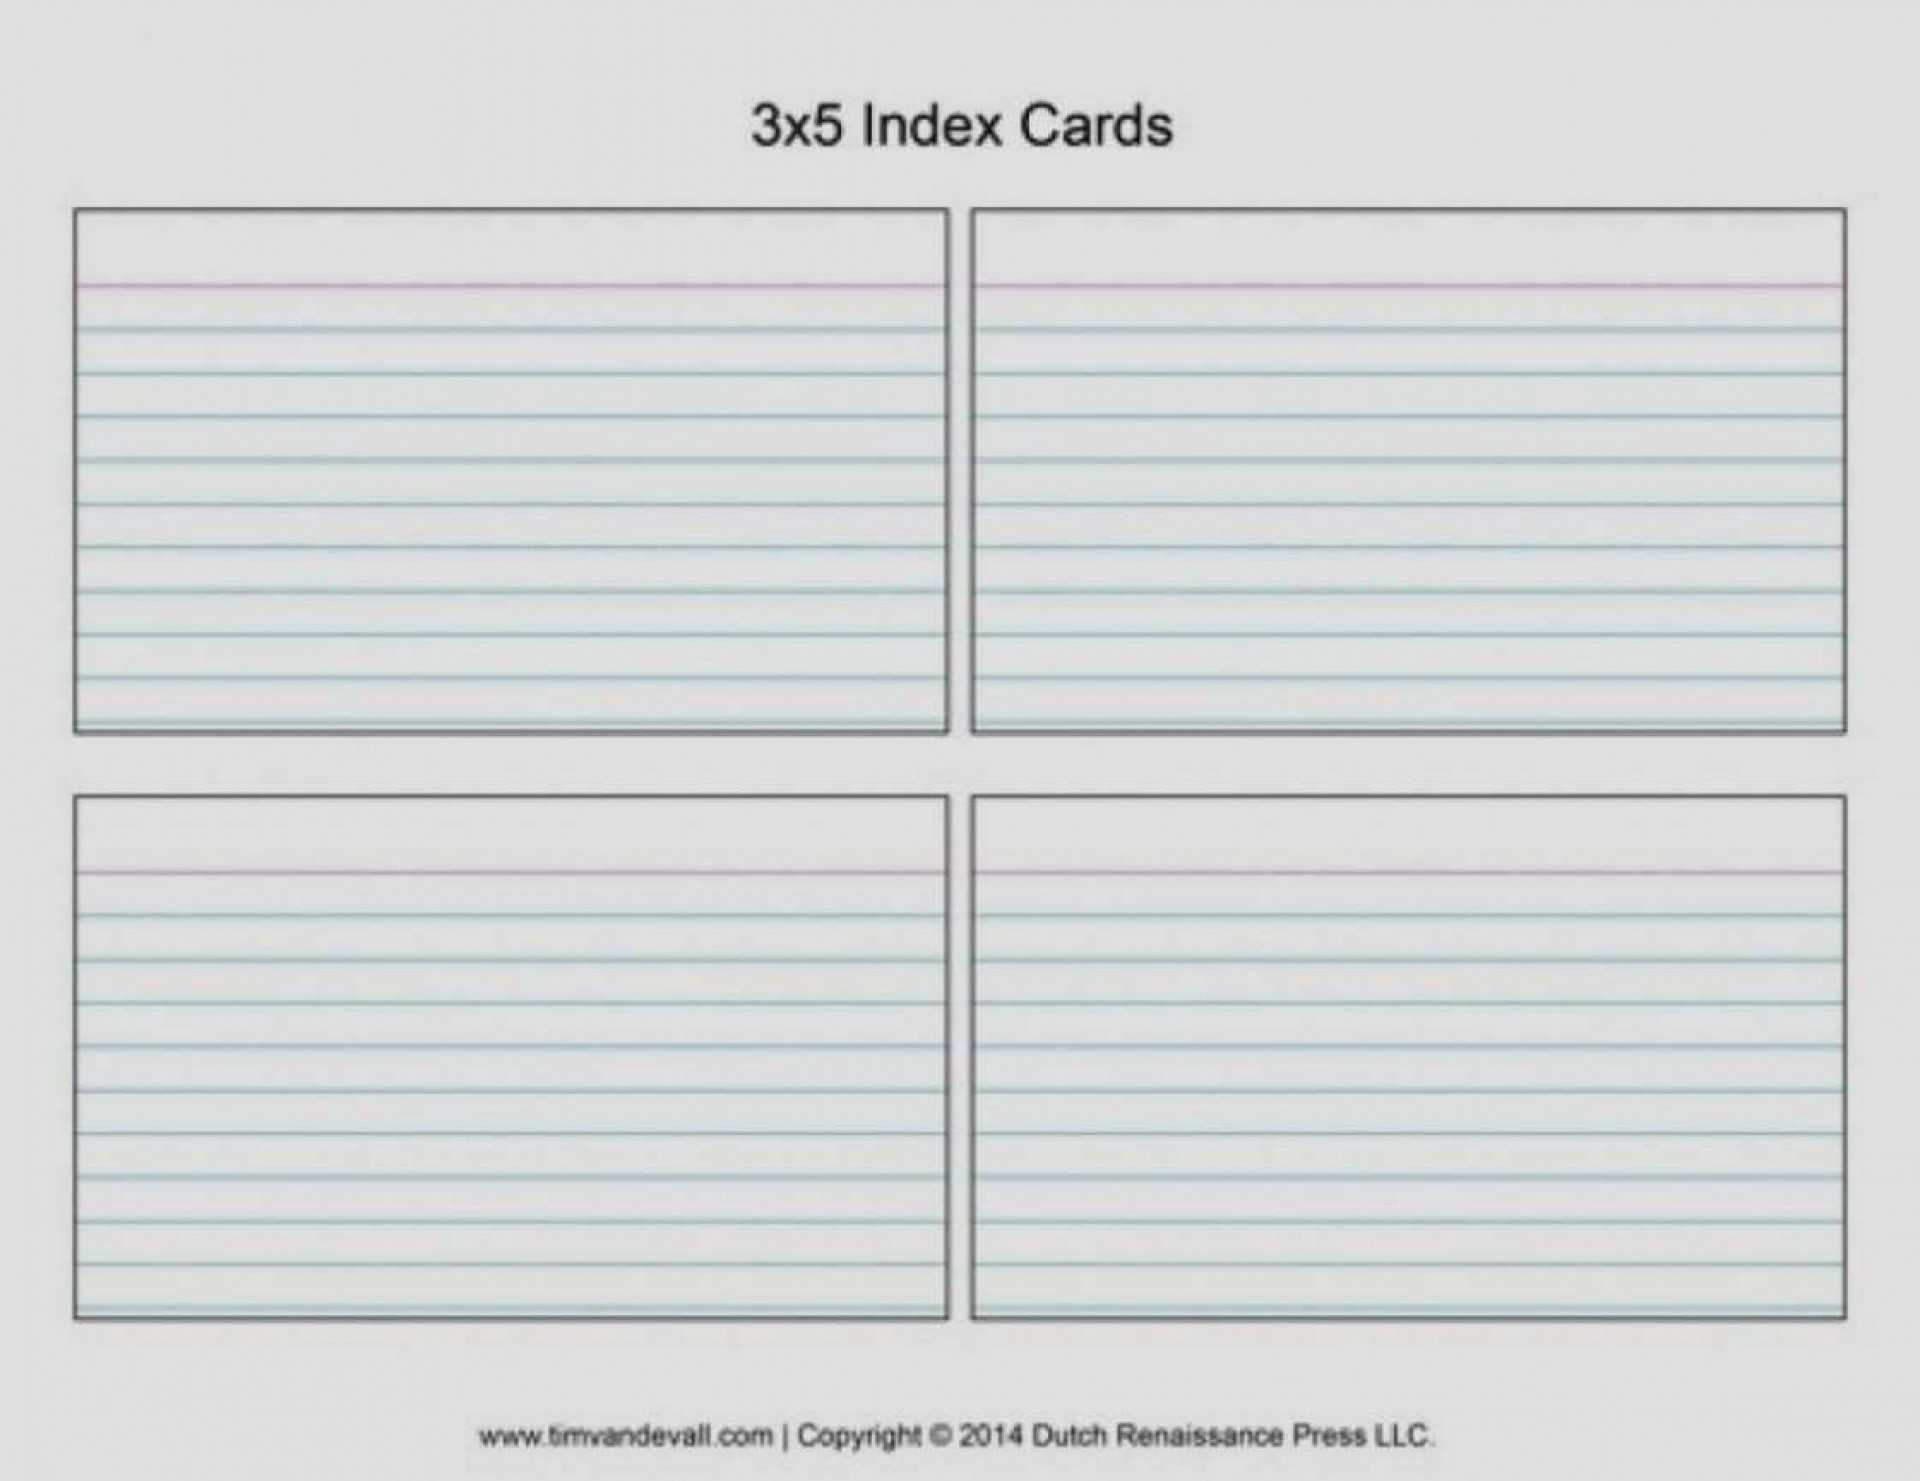 3 X 5 Index Card Template - Cumed Inside 3 By 5 Index Card Template